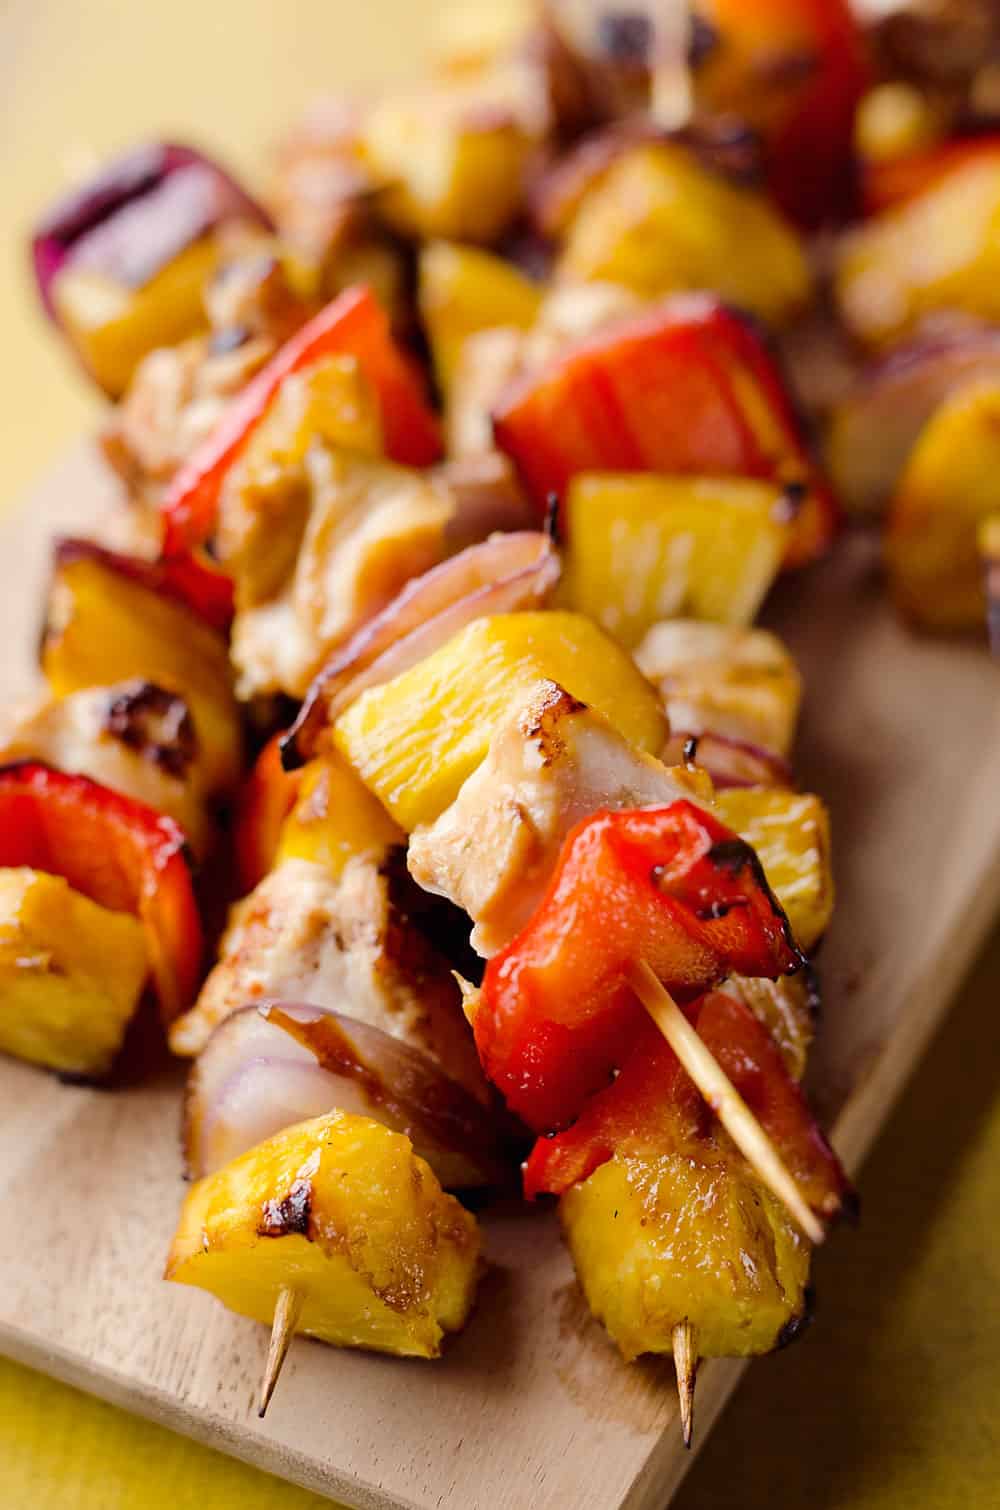 Teriyaki Chicken Kabobs are a healthy low-carb dinner bursting with flavor. These easy kabobs are prepared on the grill or in the oven and are loaded with lean chicken, bell peppers, onions and juicy pineapple for a balanced meal. 